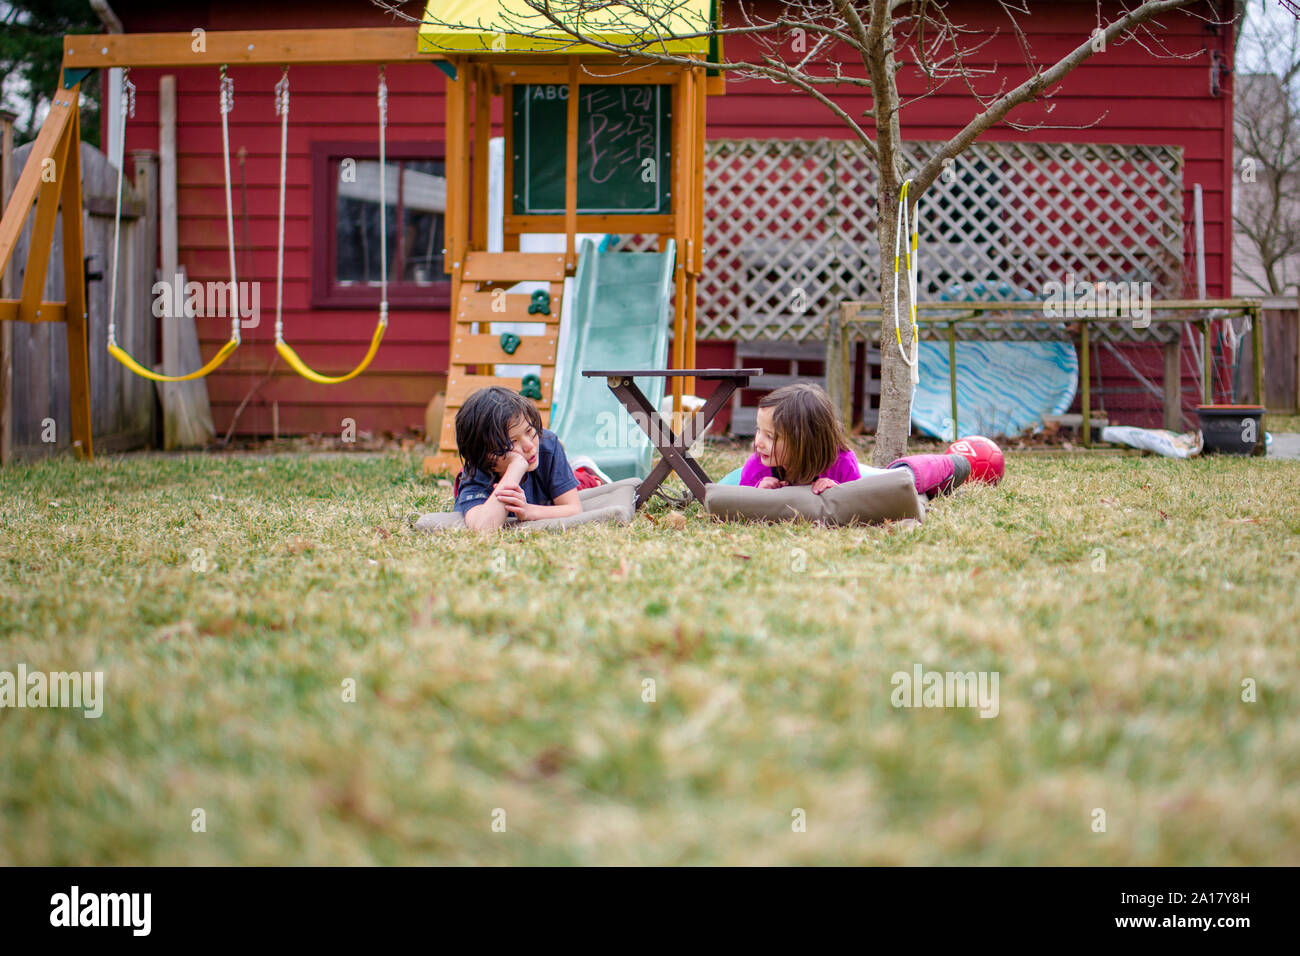 Two happy children lay on mats in their yard chatting together Stock Photo